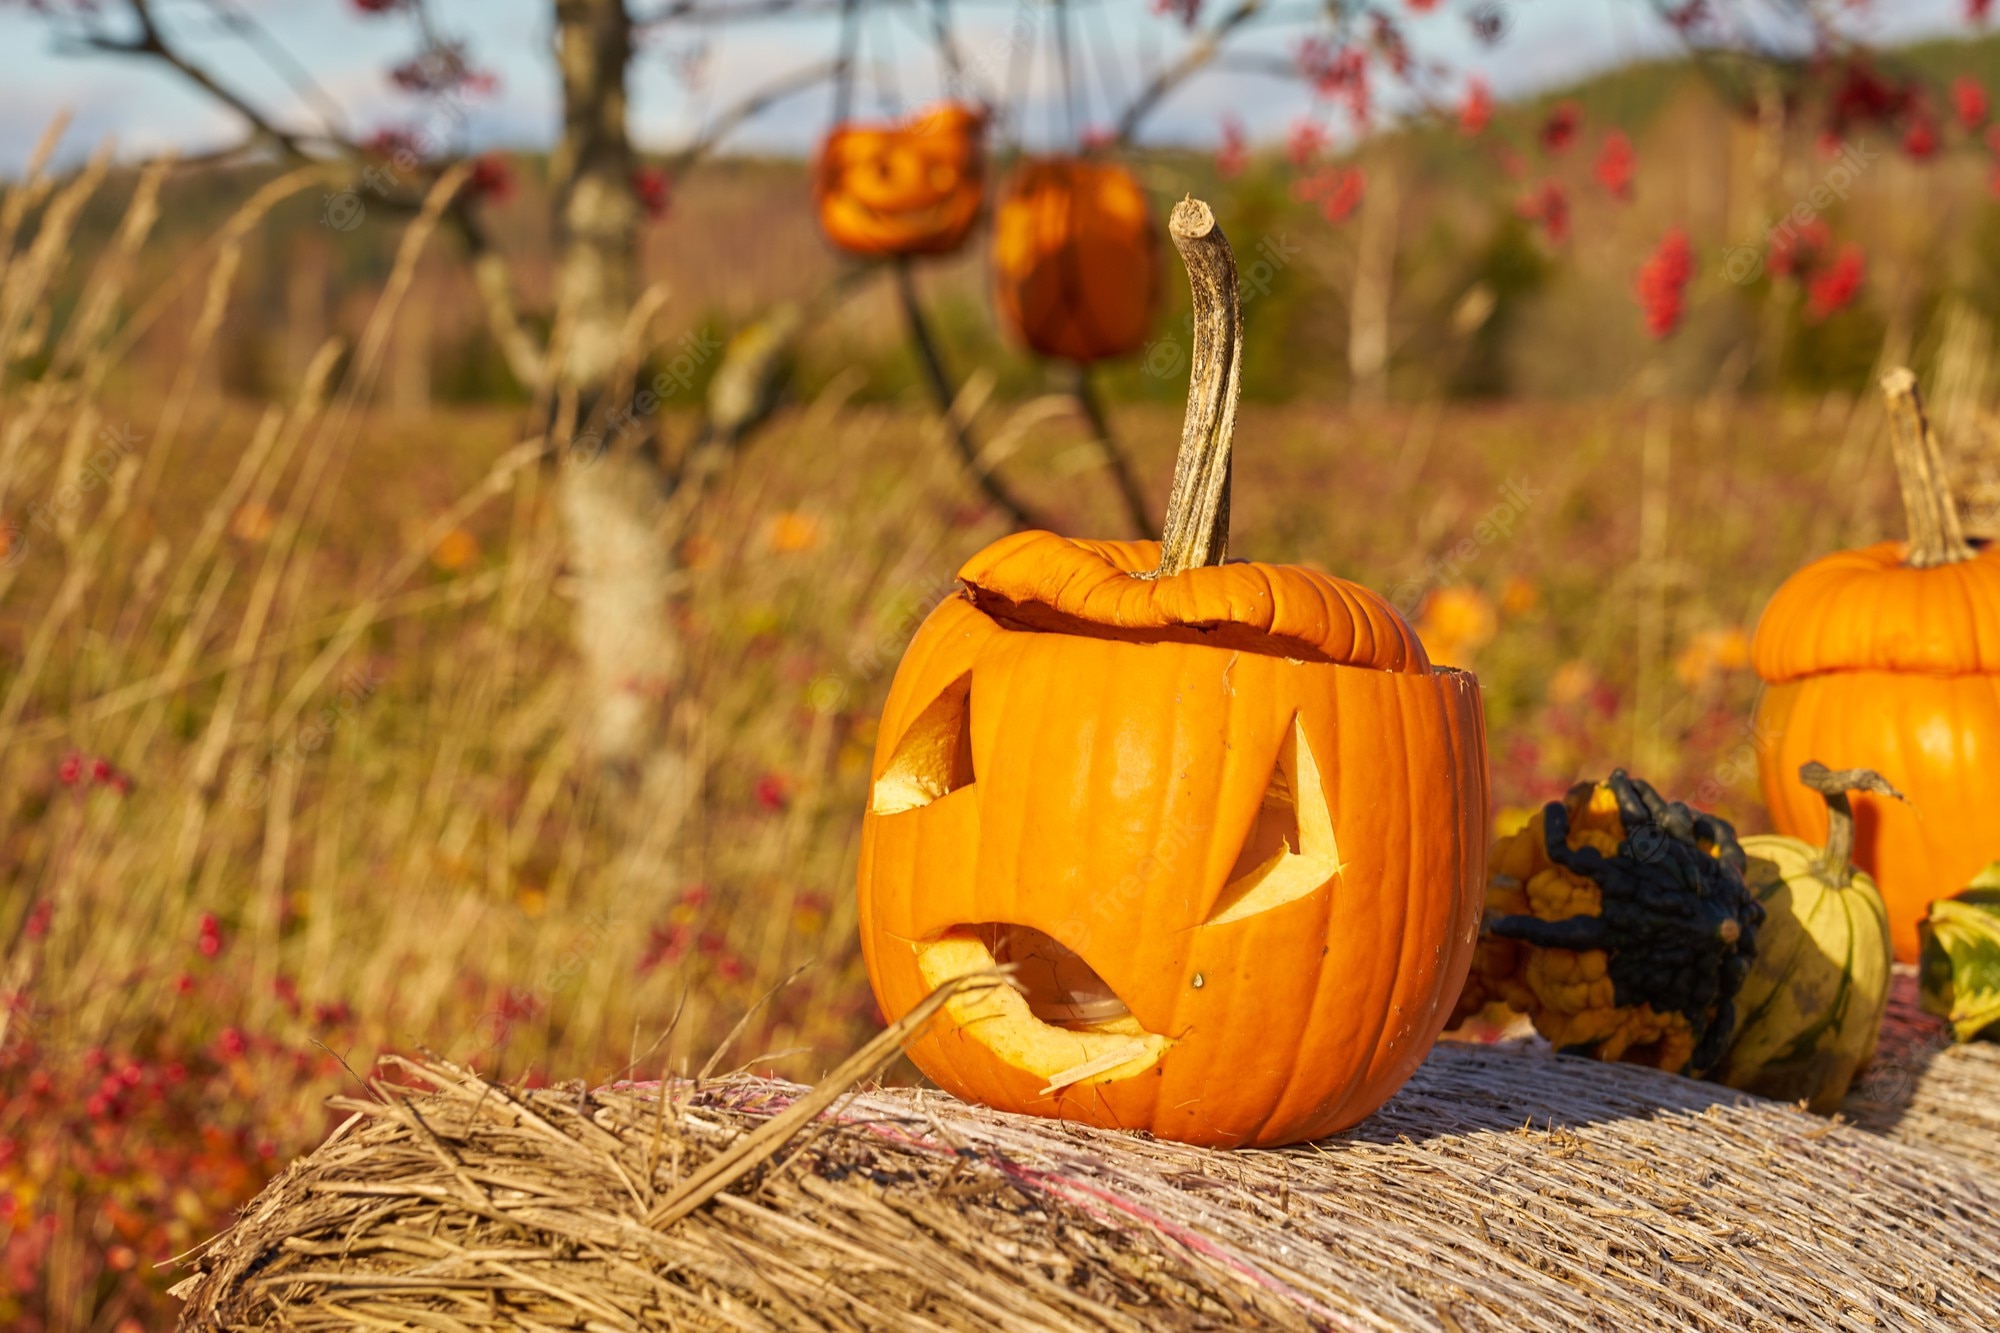 Premium Photo. Halloween pumpkins with field on the background